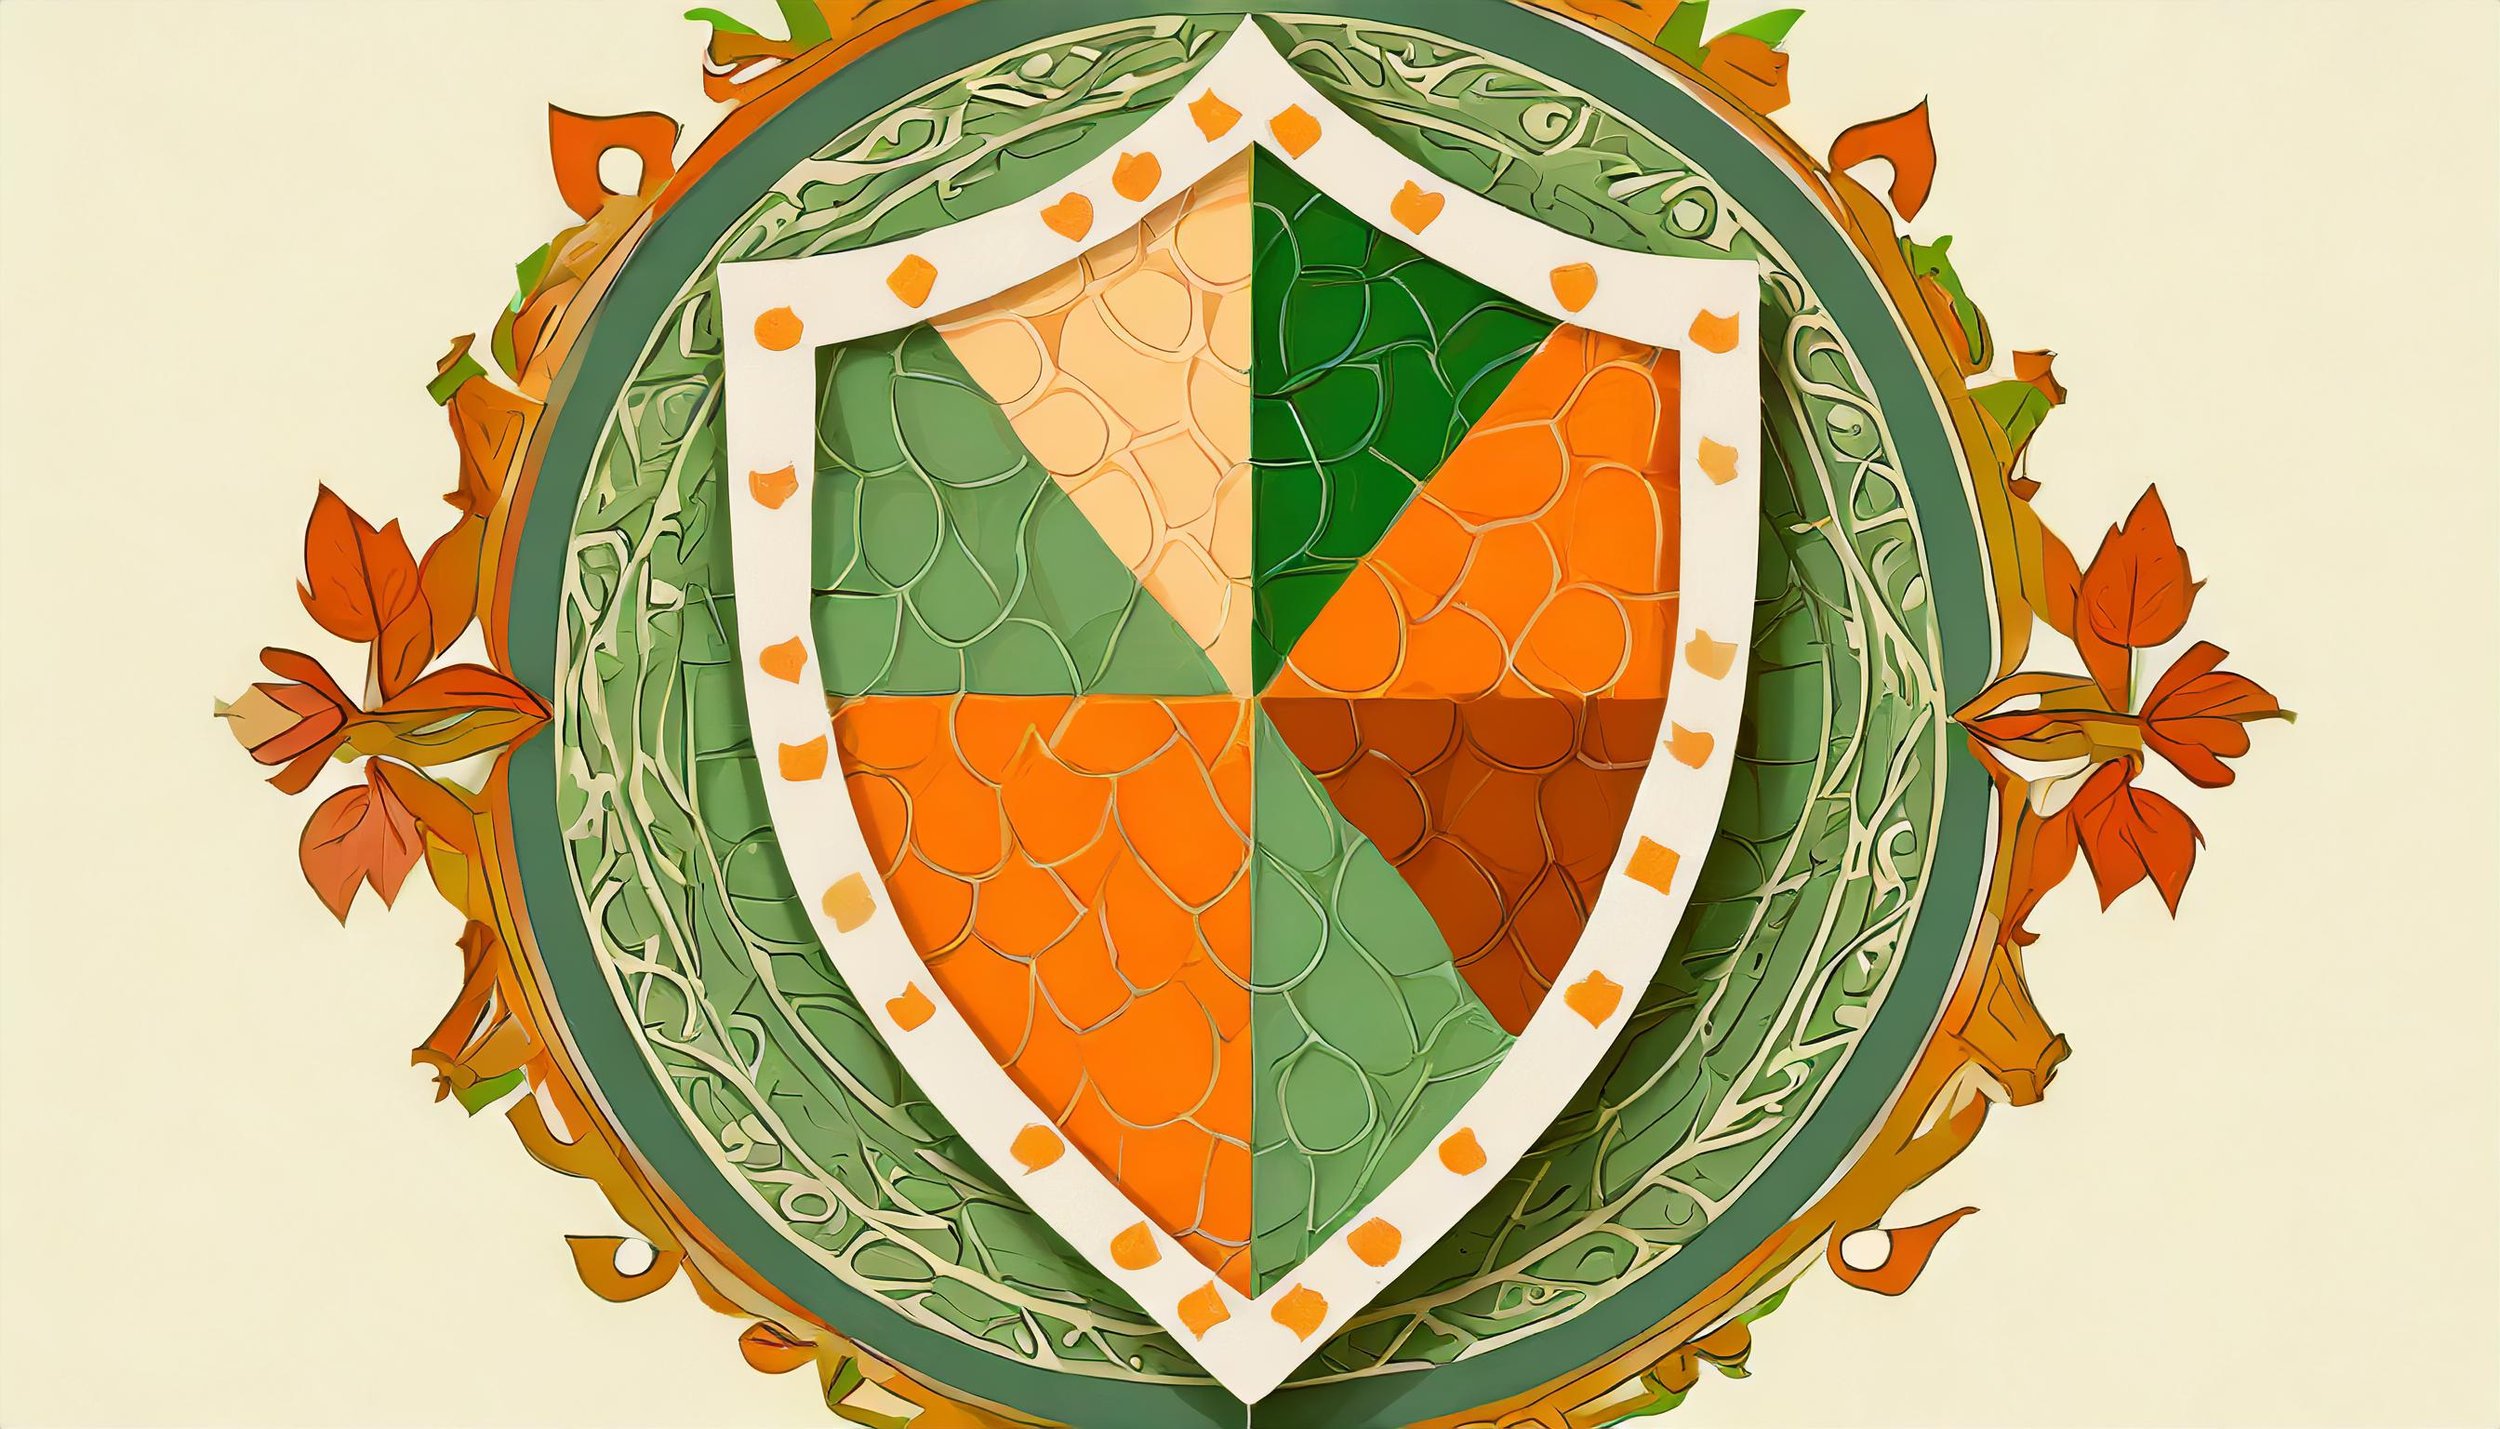 Firefly flat illustration of a medieval shield divided into six sections; oranges and greens; framed (1).jpg